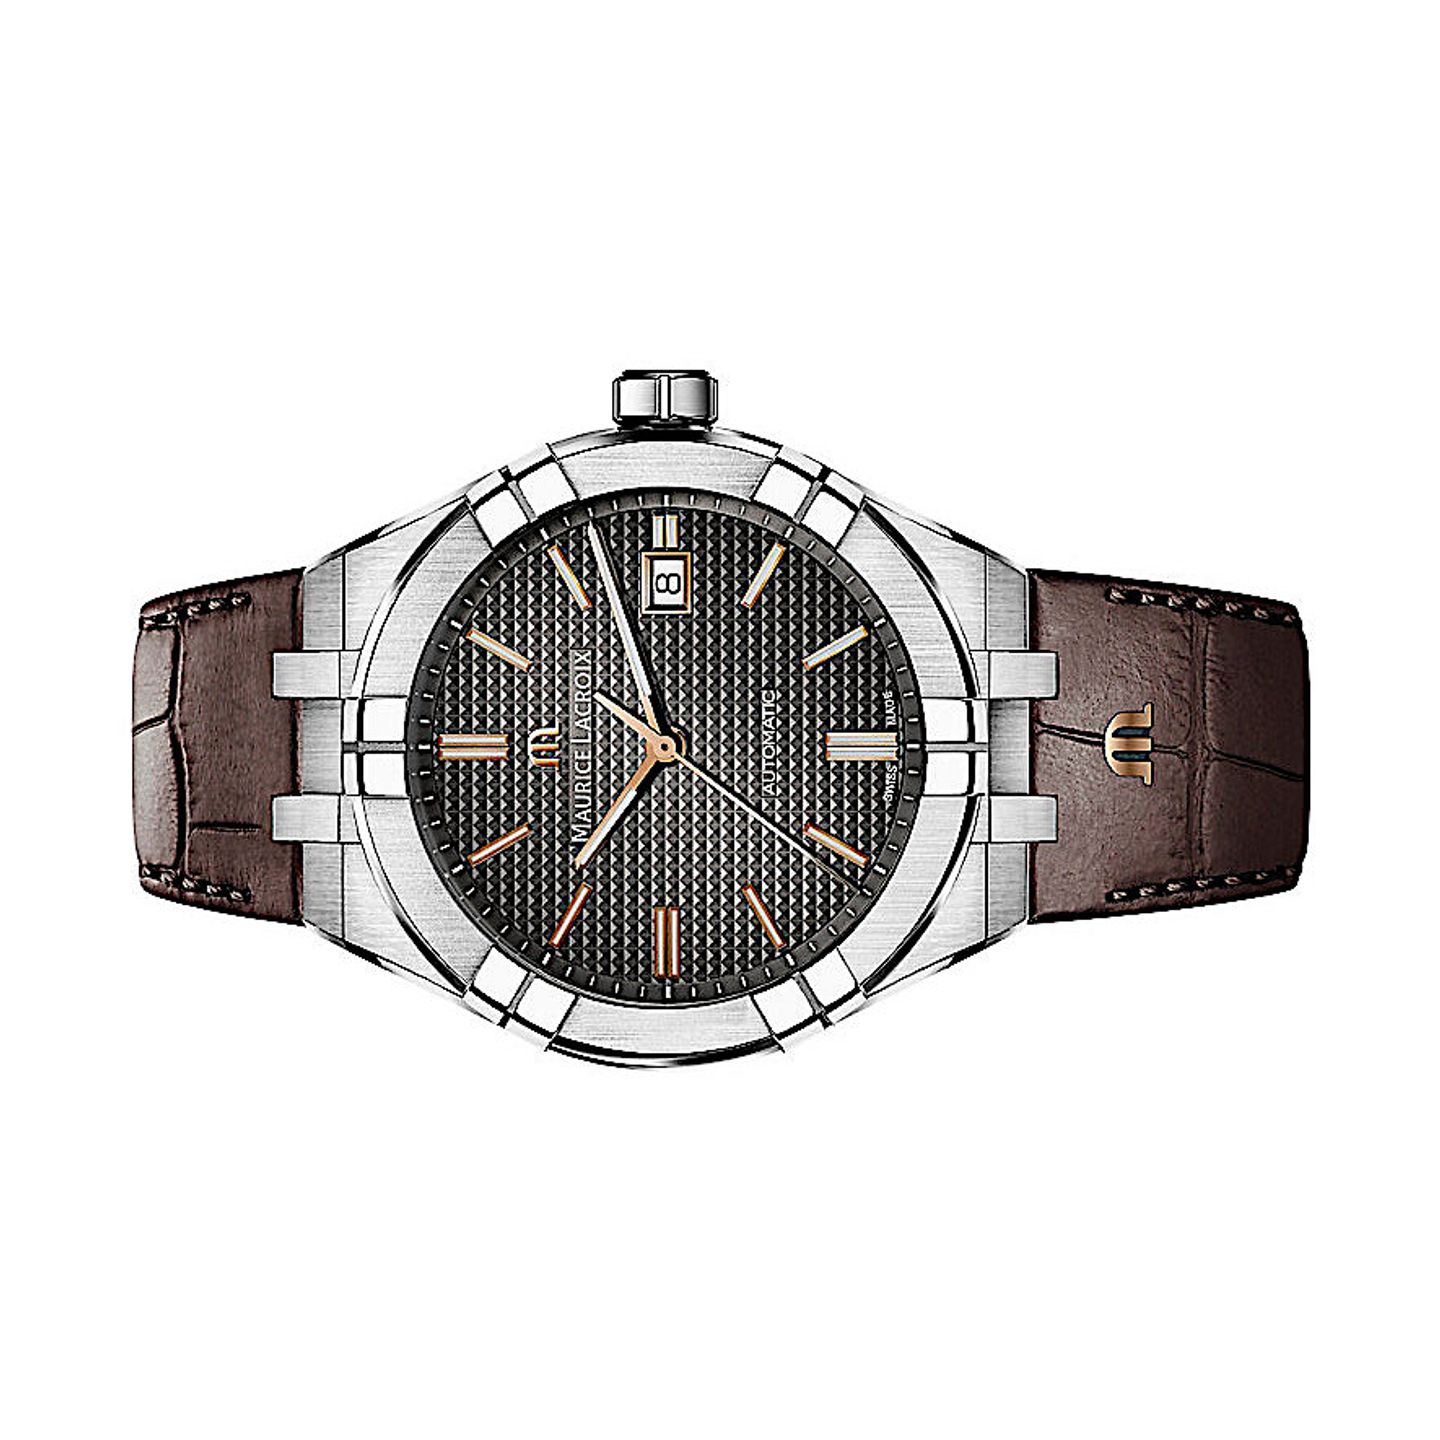 Maurice Lacroix Aikon AI6008-SS001-331-1 (2022) - Grey dial 42 mm Steel case (1/1)